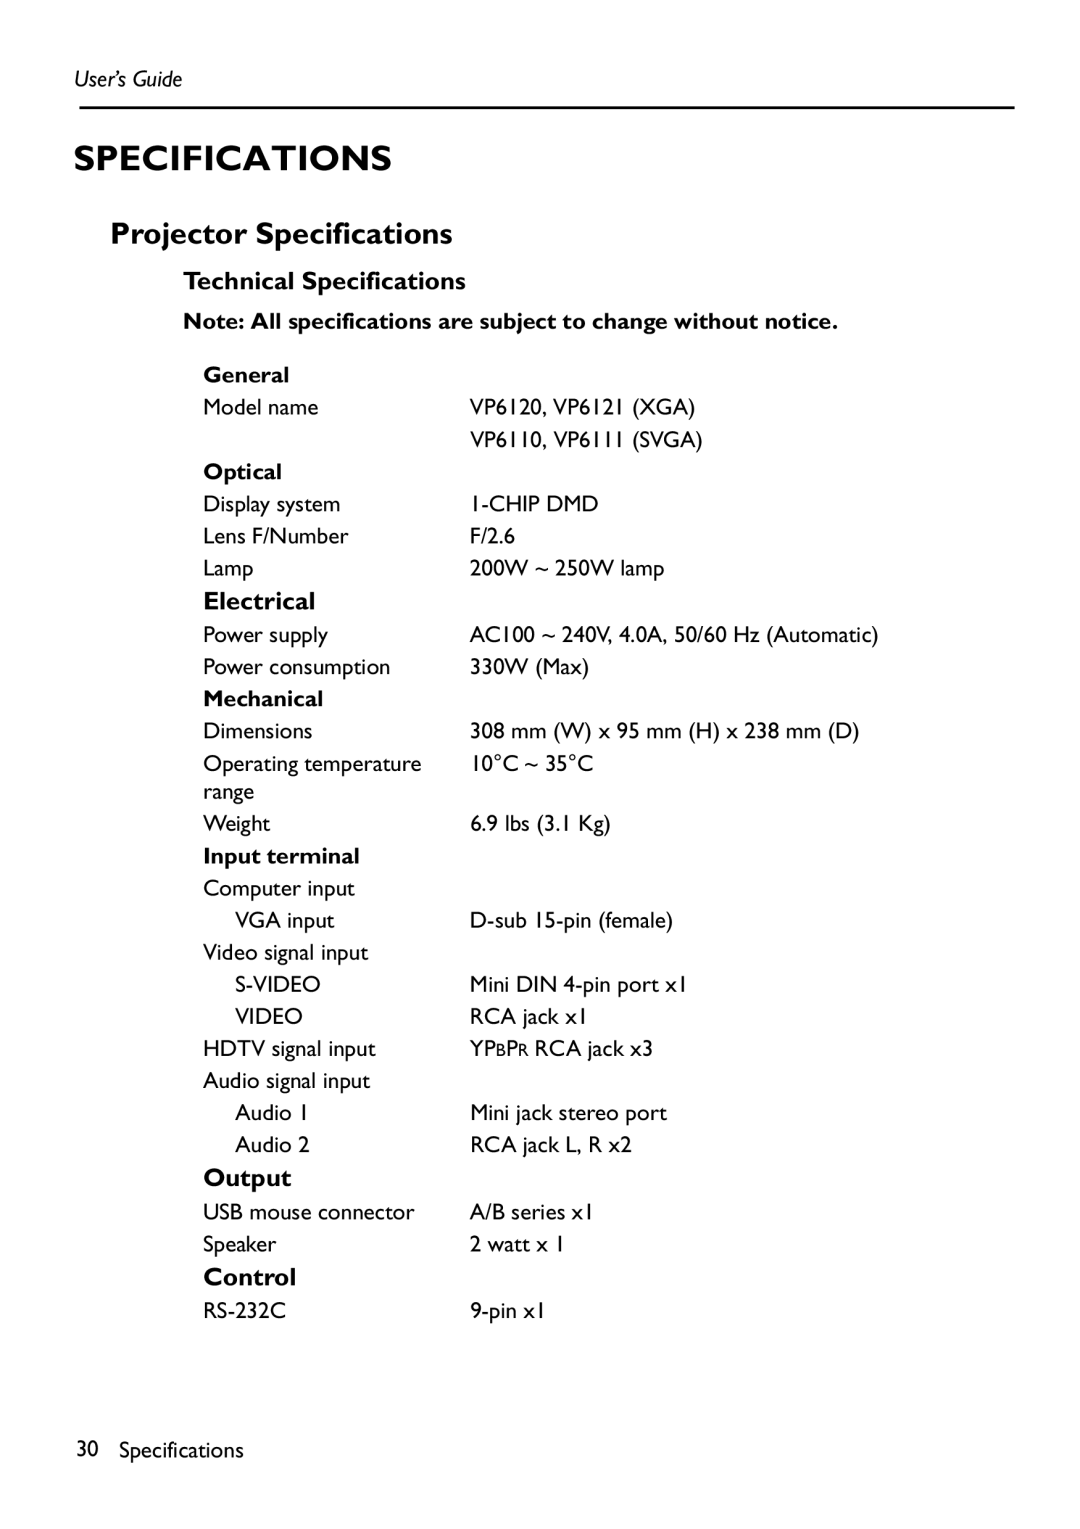 HP Vp6111 manual Projector Specifications 